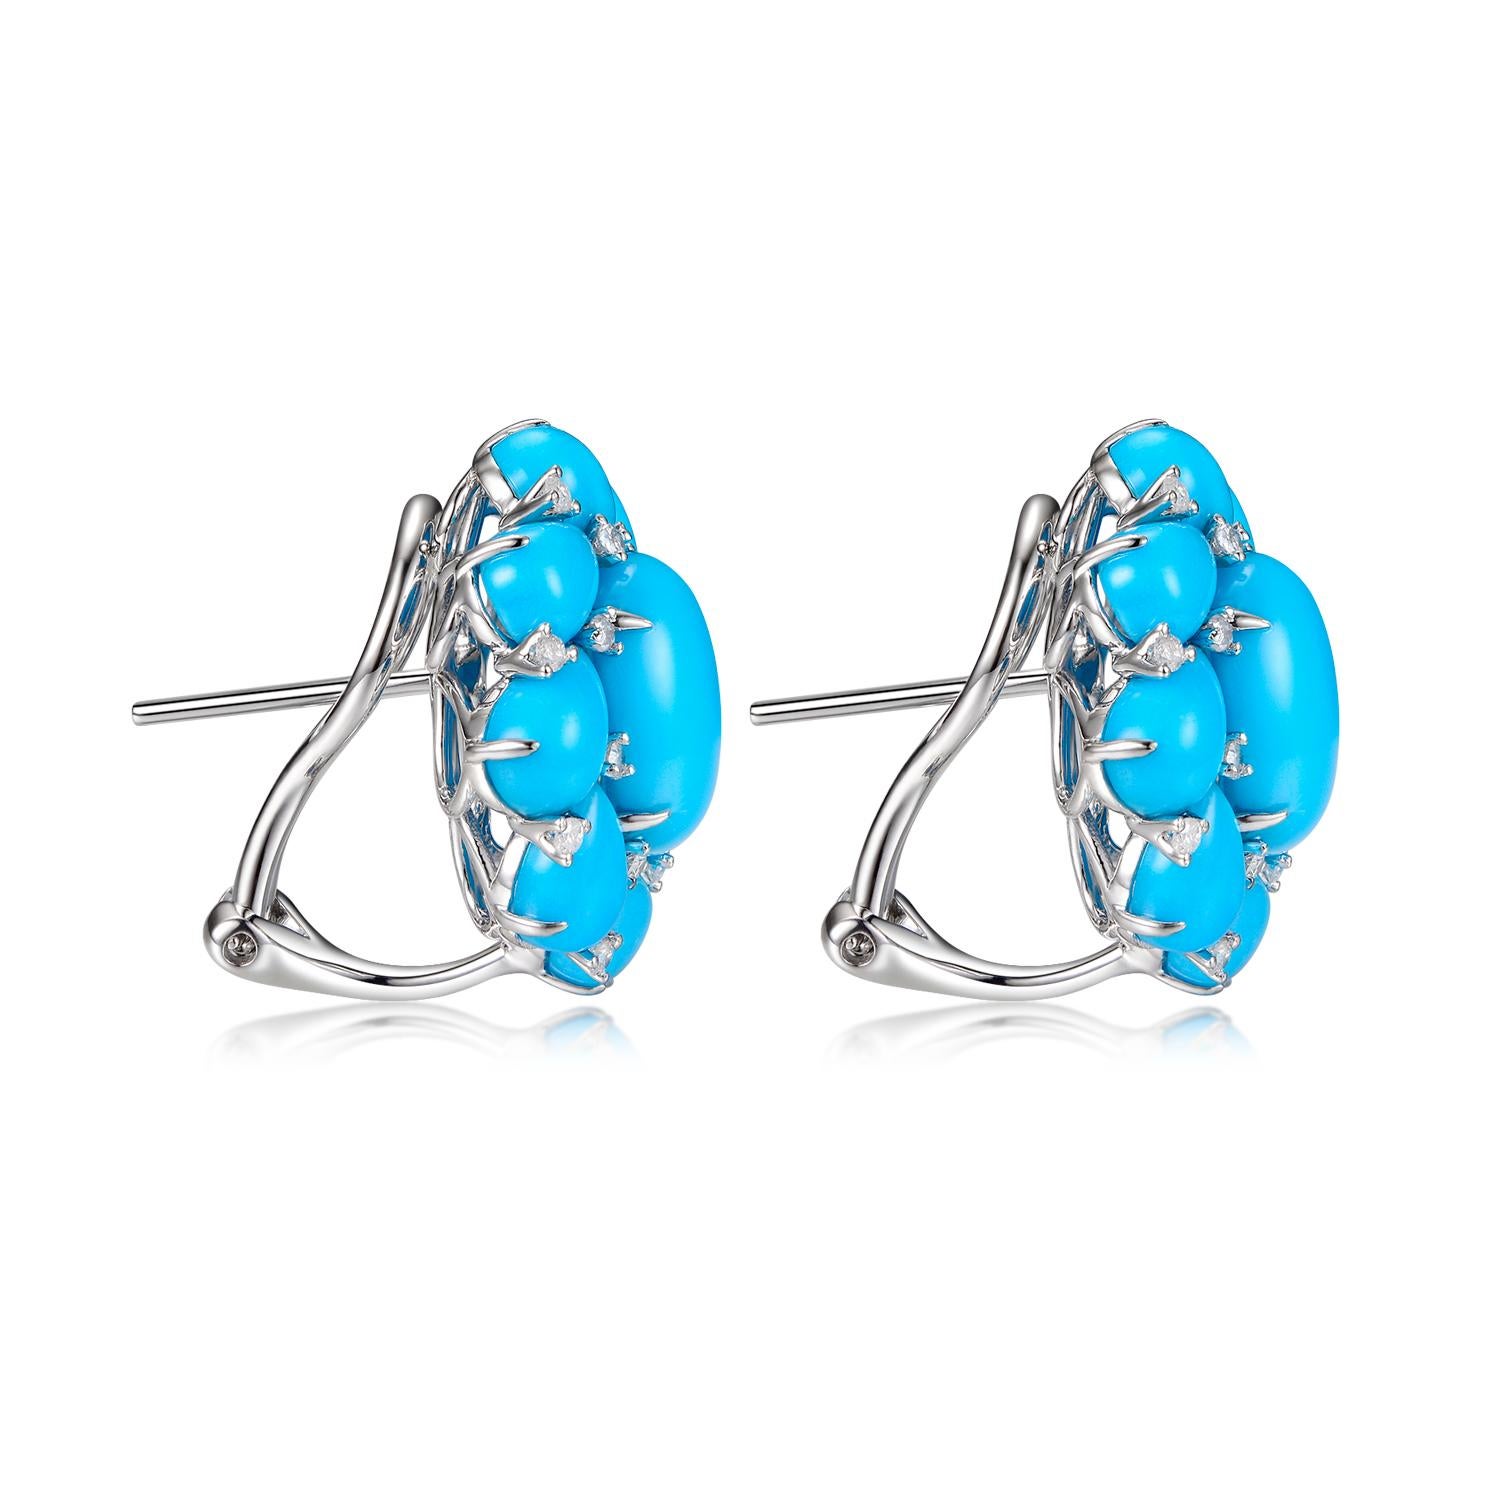 This turquoise earring features 2 oval turquoise in center weight 4.3 carats, surrounded by 7.43 carats of pear shape turquoise. Assented with 0.3 carat of white round diamonds. All turquoise use in production are from the prominent Sleeping Beauty